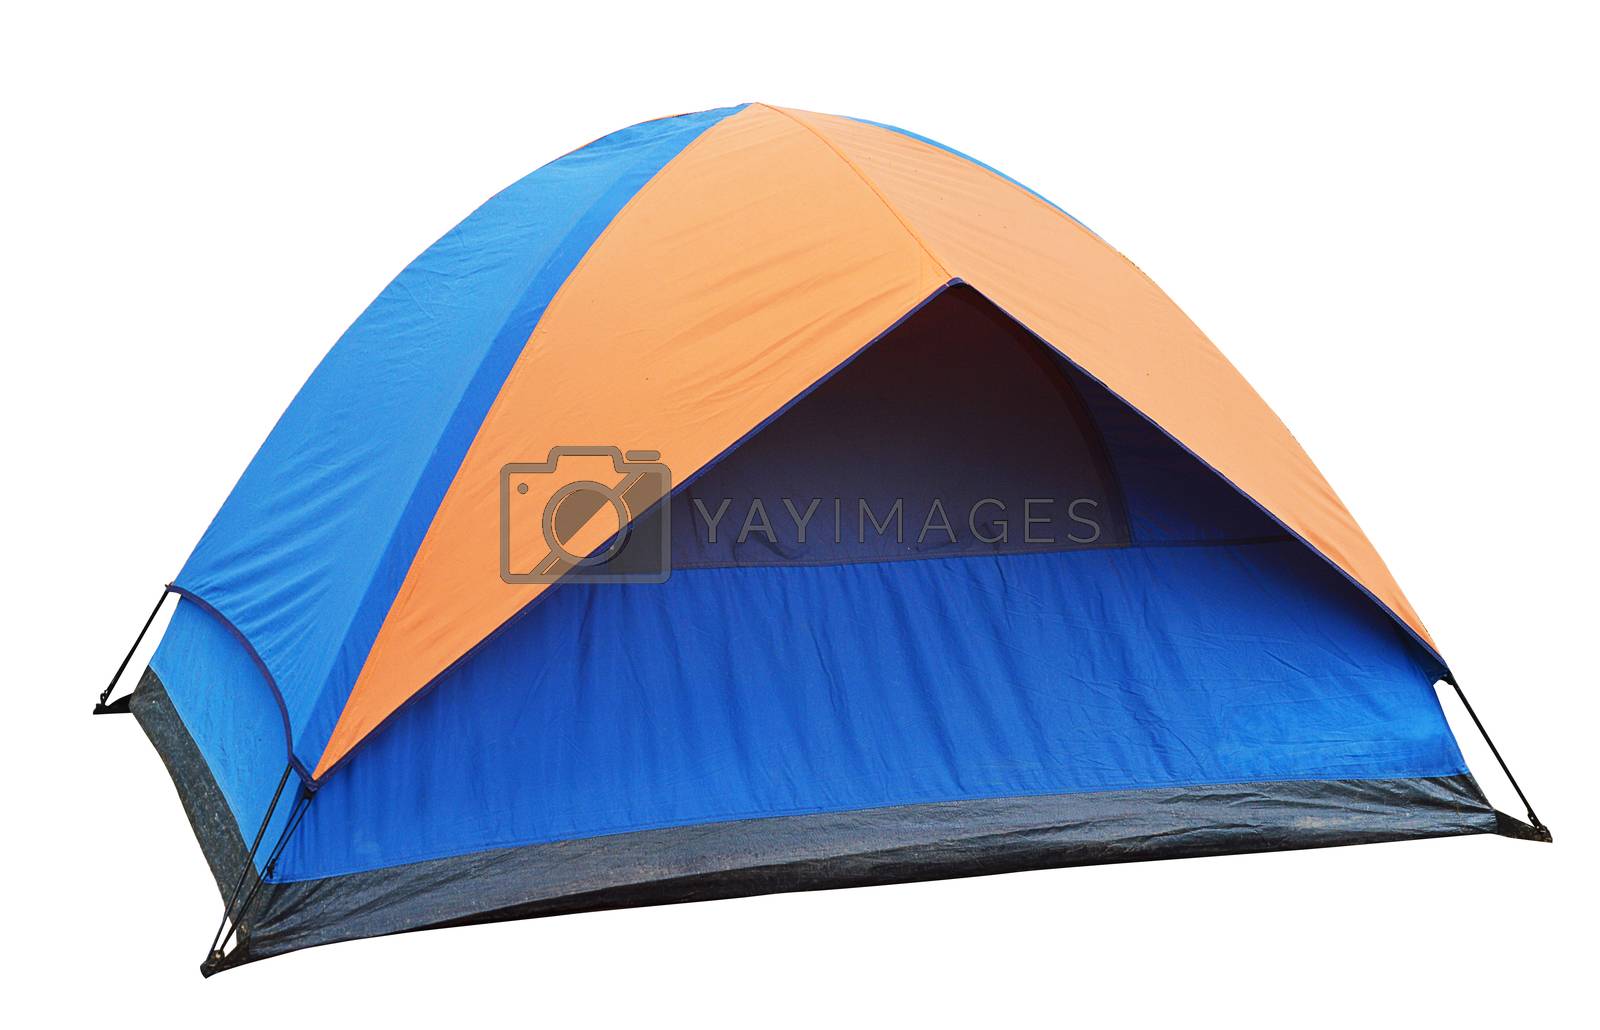 Royalty free image of blue Tent isolated by Nu1983